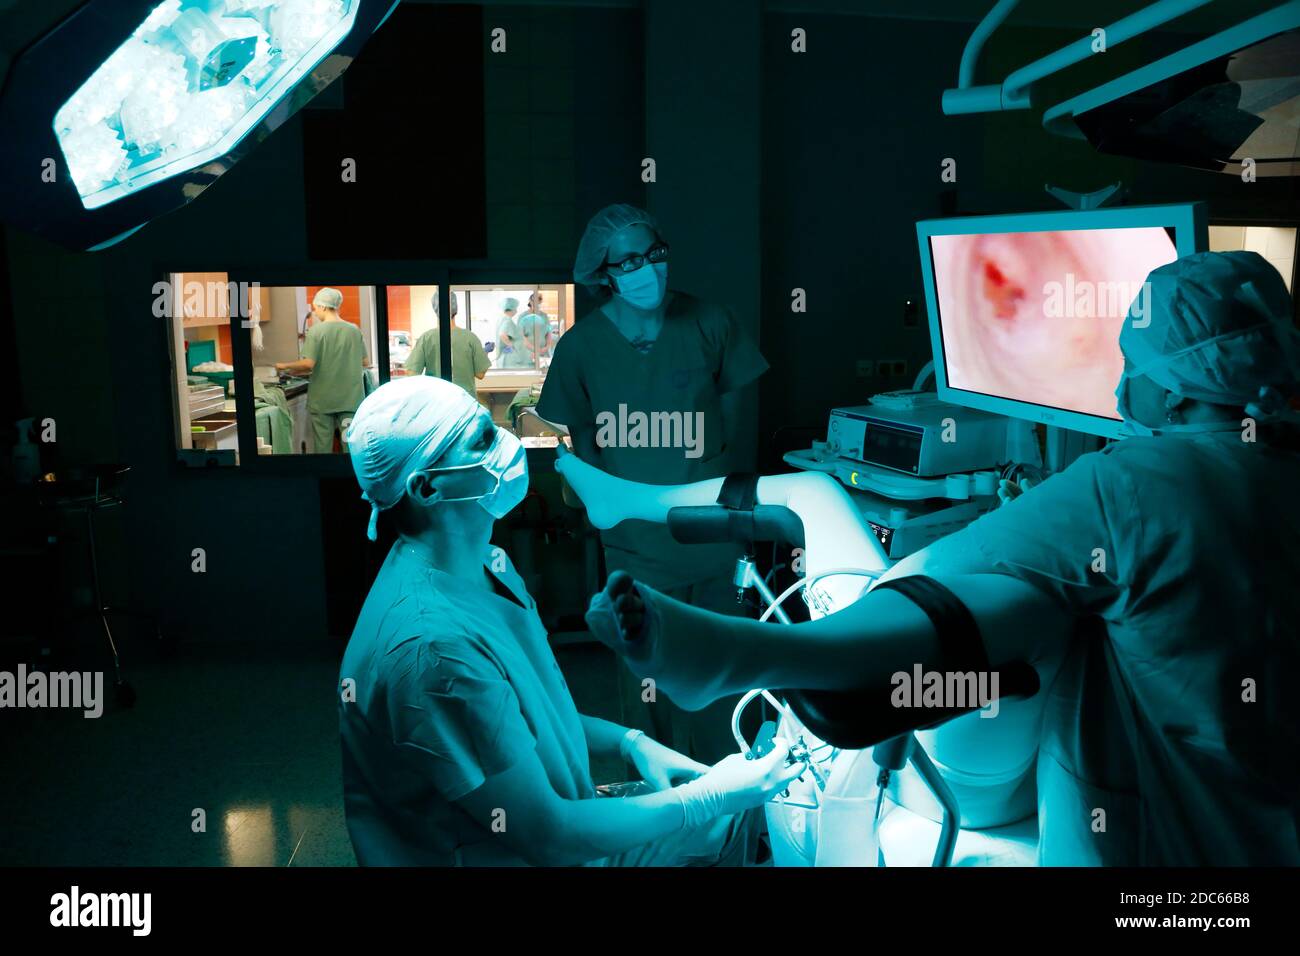 gynecologist during laparoscopic surgery in the operating room of a hospital Stock Photo